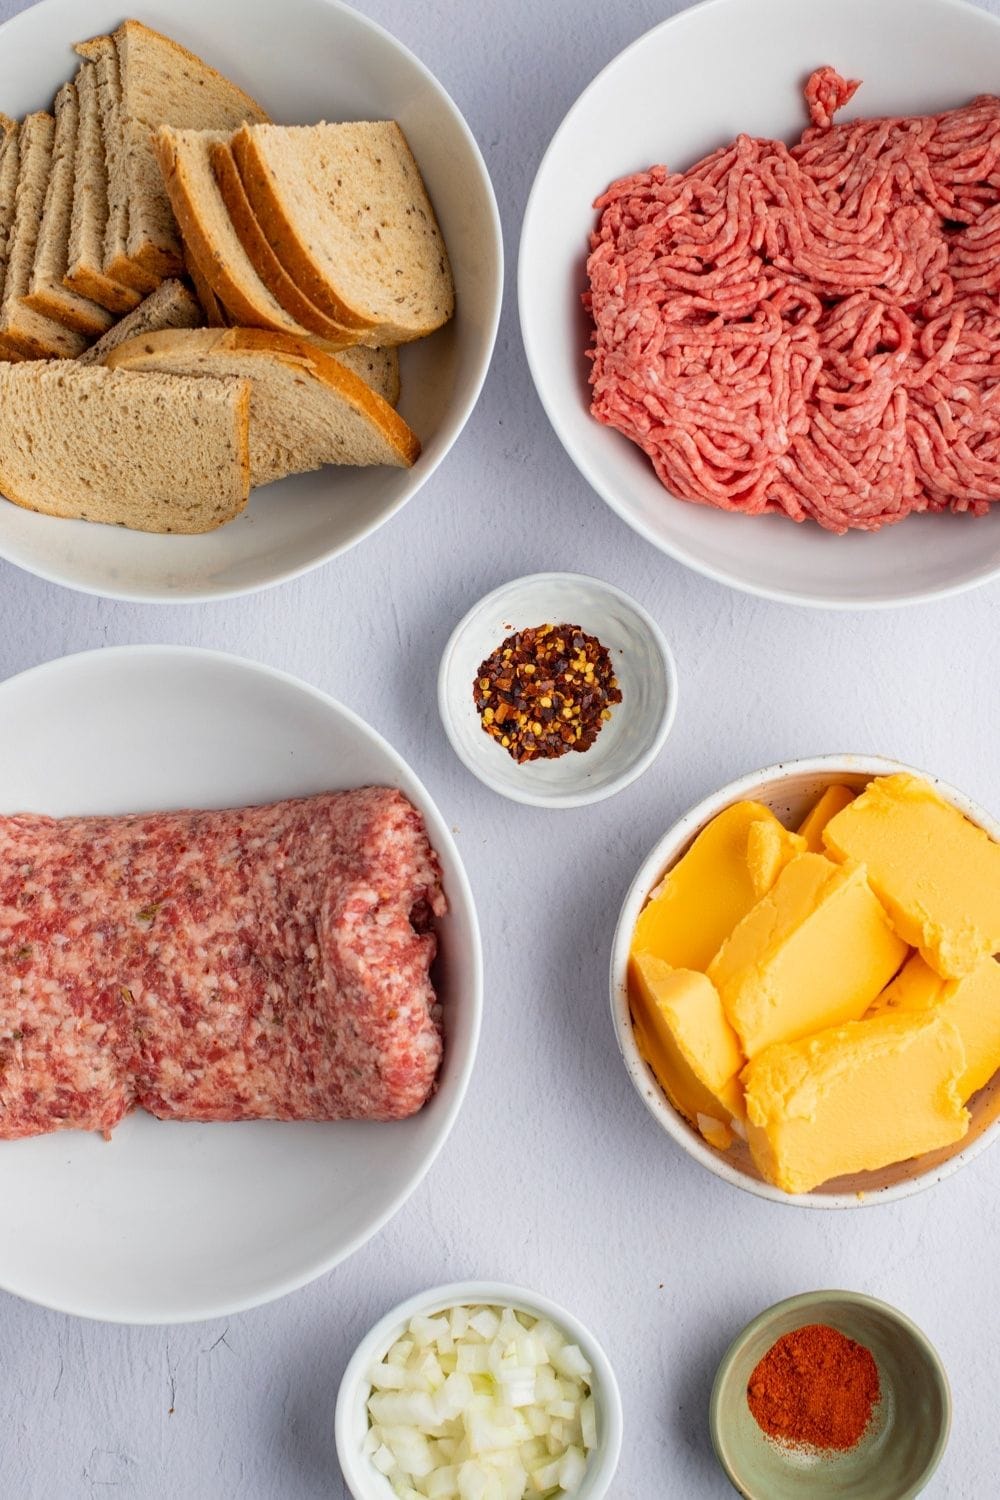 Hanky Panky Ingredients: Ground Beef, Ground Pork Sausage, Sliced Cocktail Bread, Pepper and Cheese